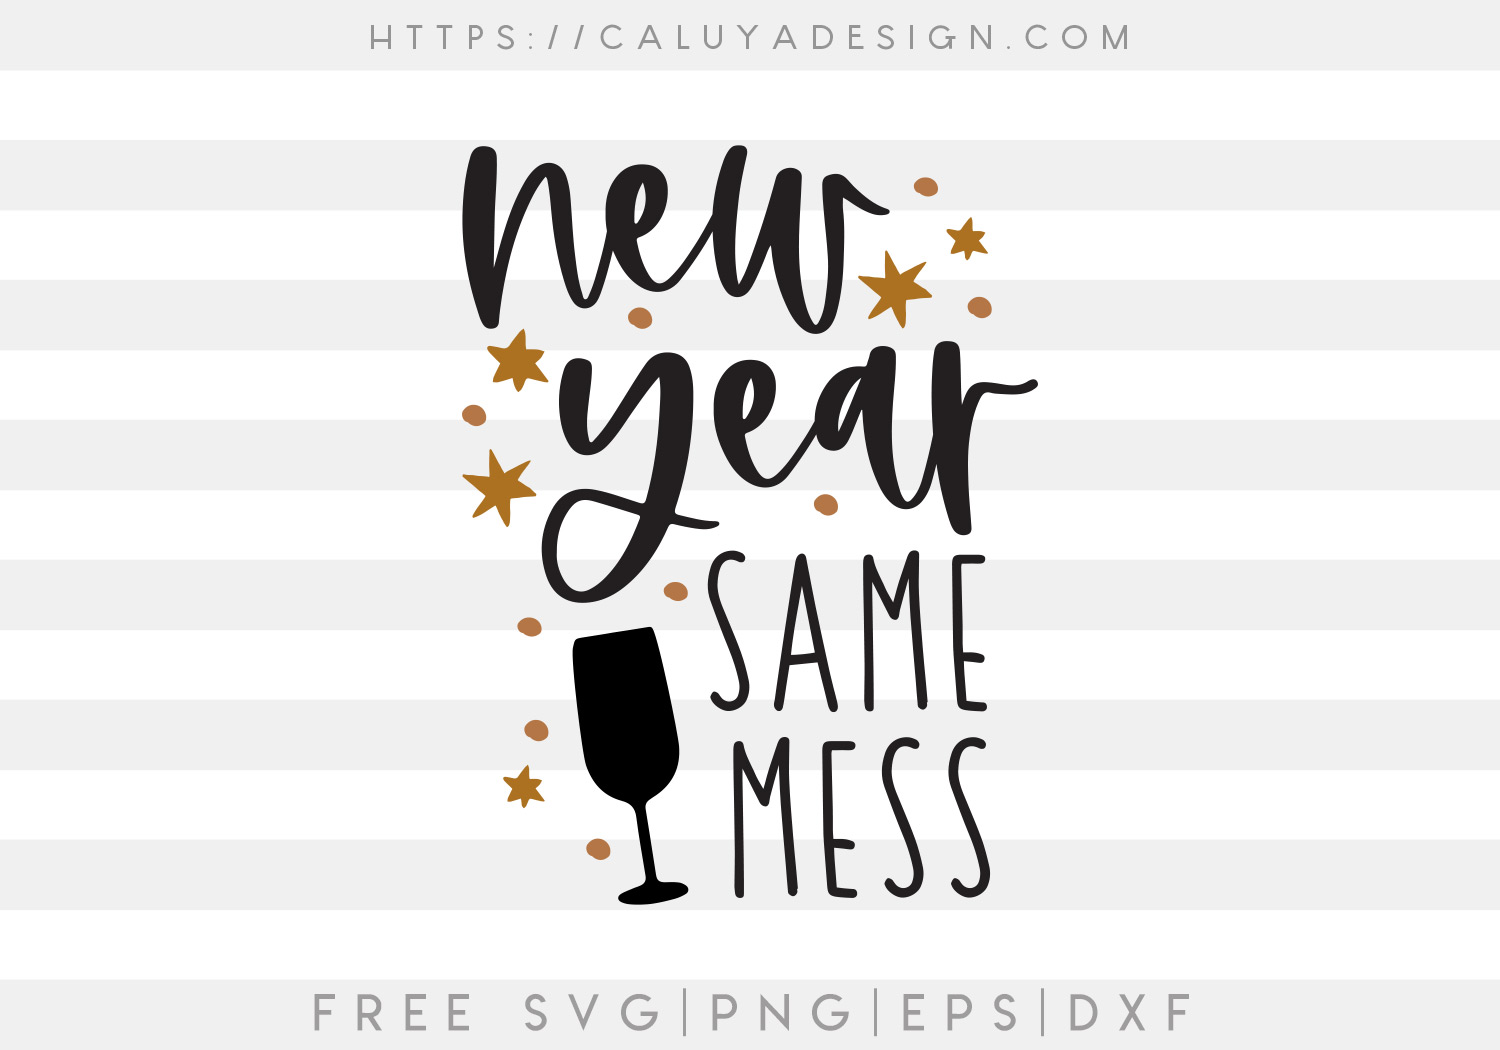 New Year Same Mess SVG, PNG, EPS & DXF